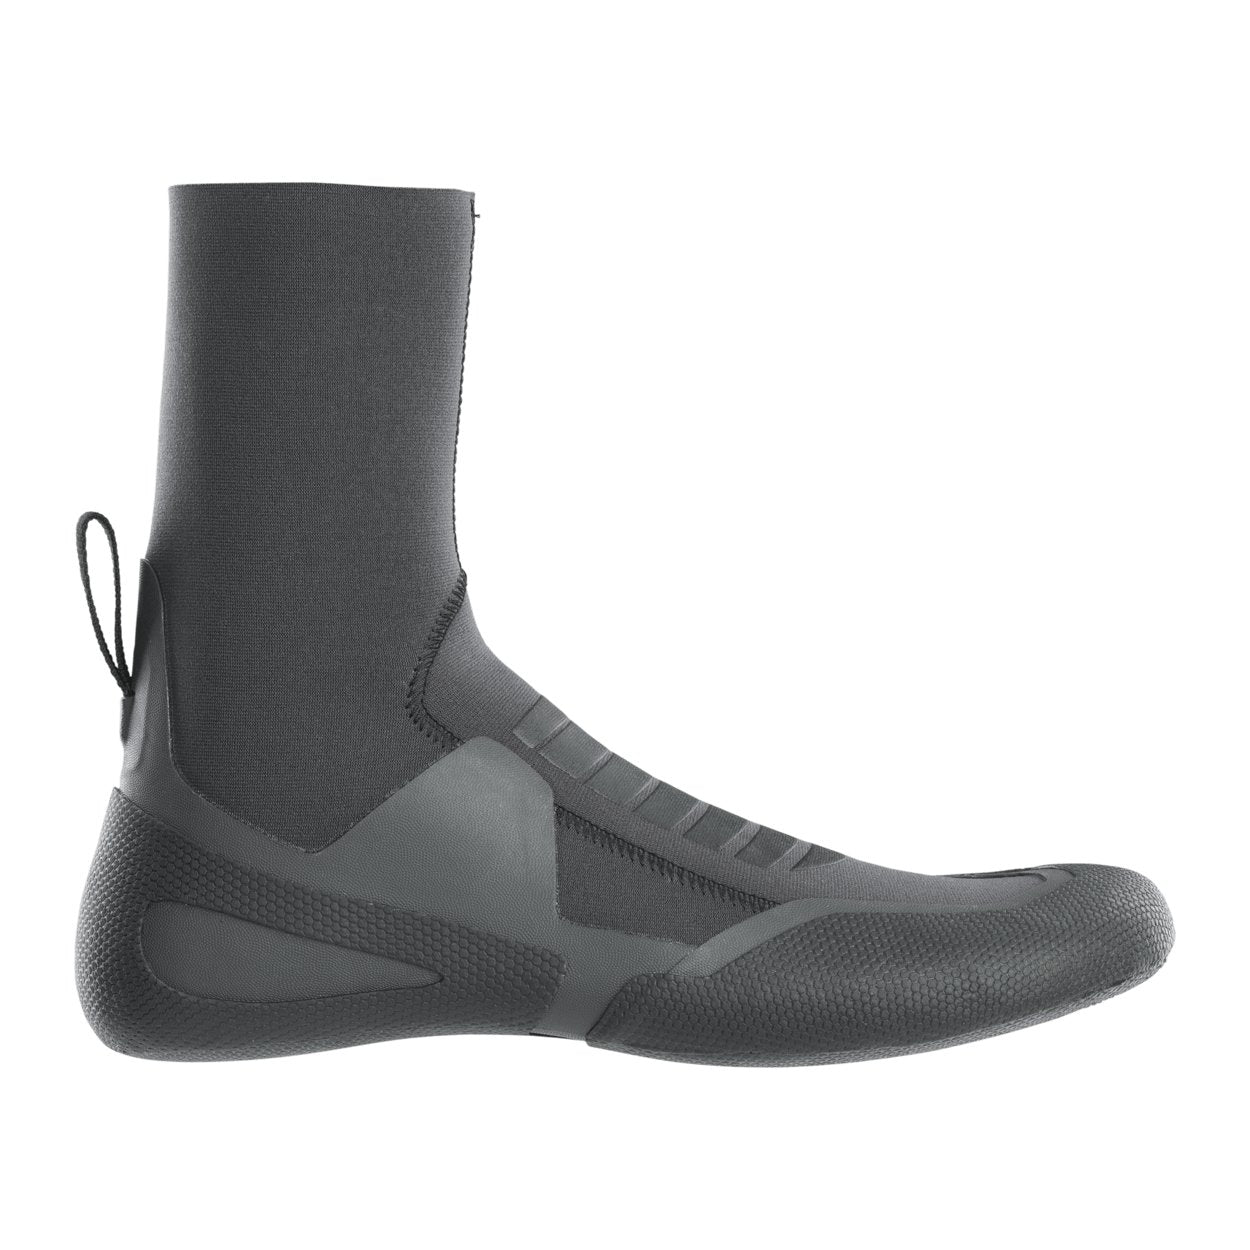 ION Plasma Boots 3/2 Round Toe 2023 - Worthing Watersports - 9010583092942 - Footwear - ION Water